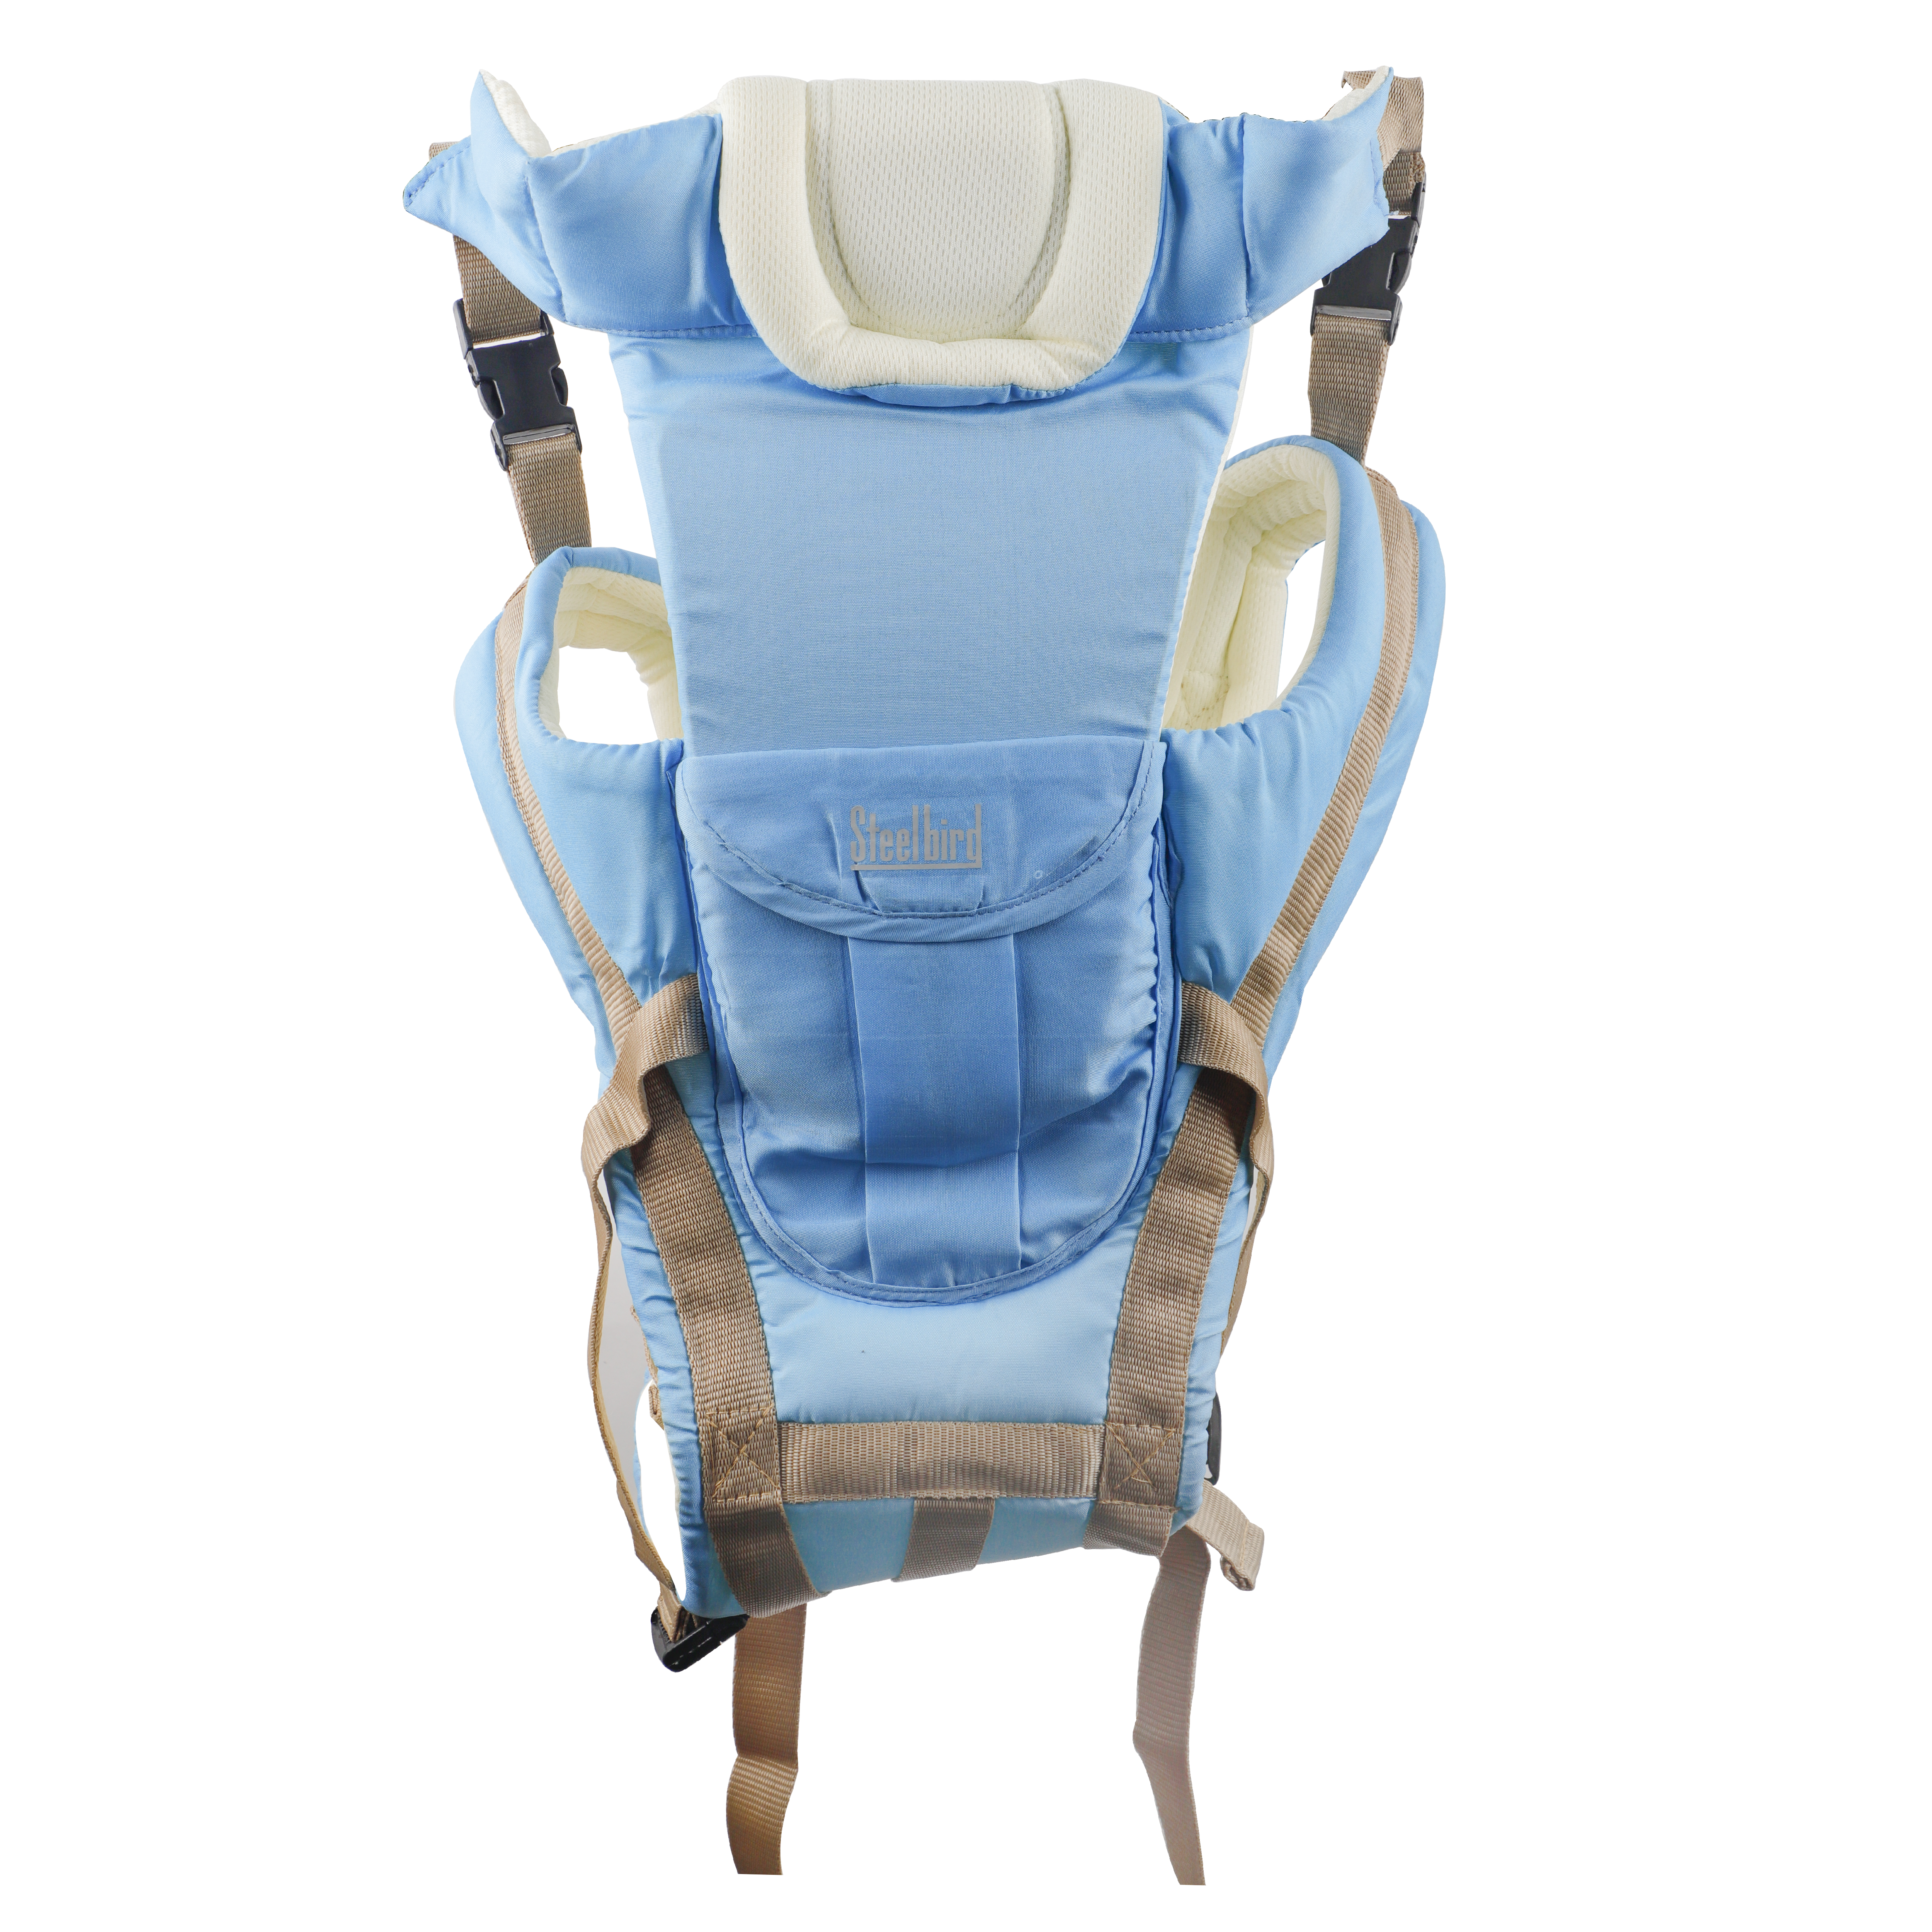 Steelbird Super Four Kids 4-in-1 Adjustable Baby Carrier Cum Kangaroo Bag-Lightweight And Breathable-Back-Front Carrier For Baby With Safety Belt-Max Weight Up To 12 Kg (Cream Baby Blue)